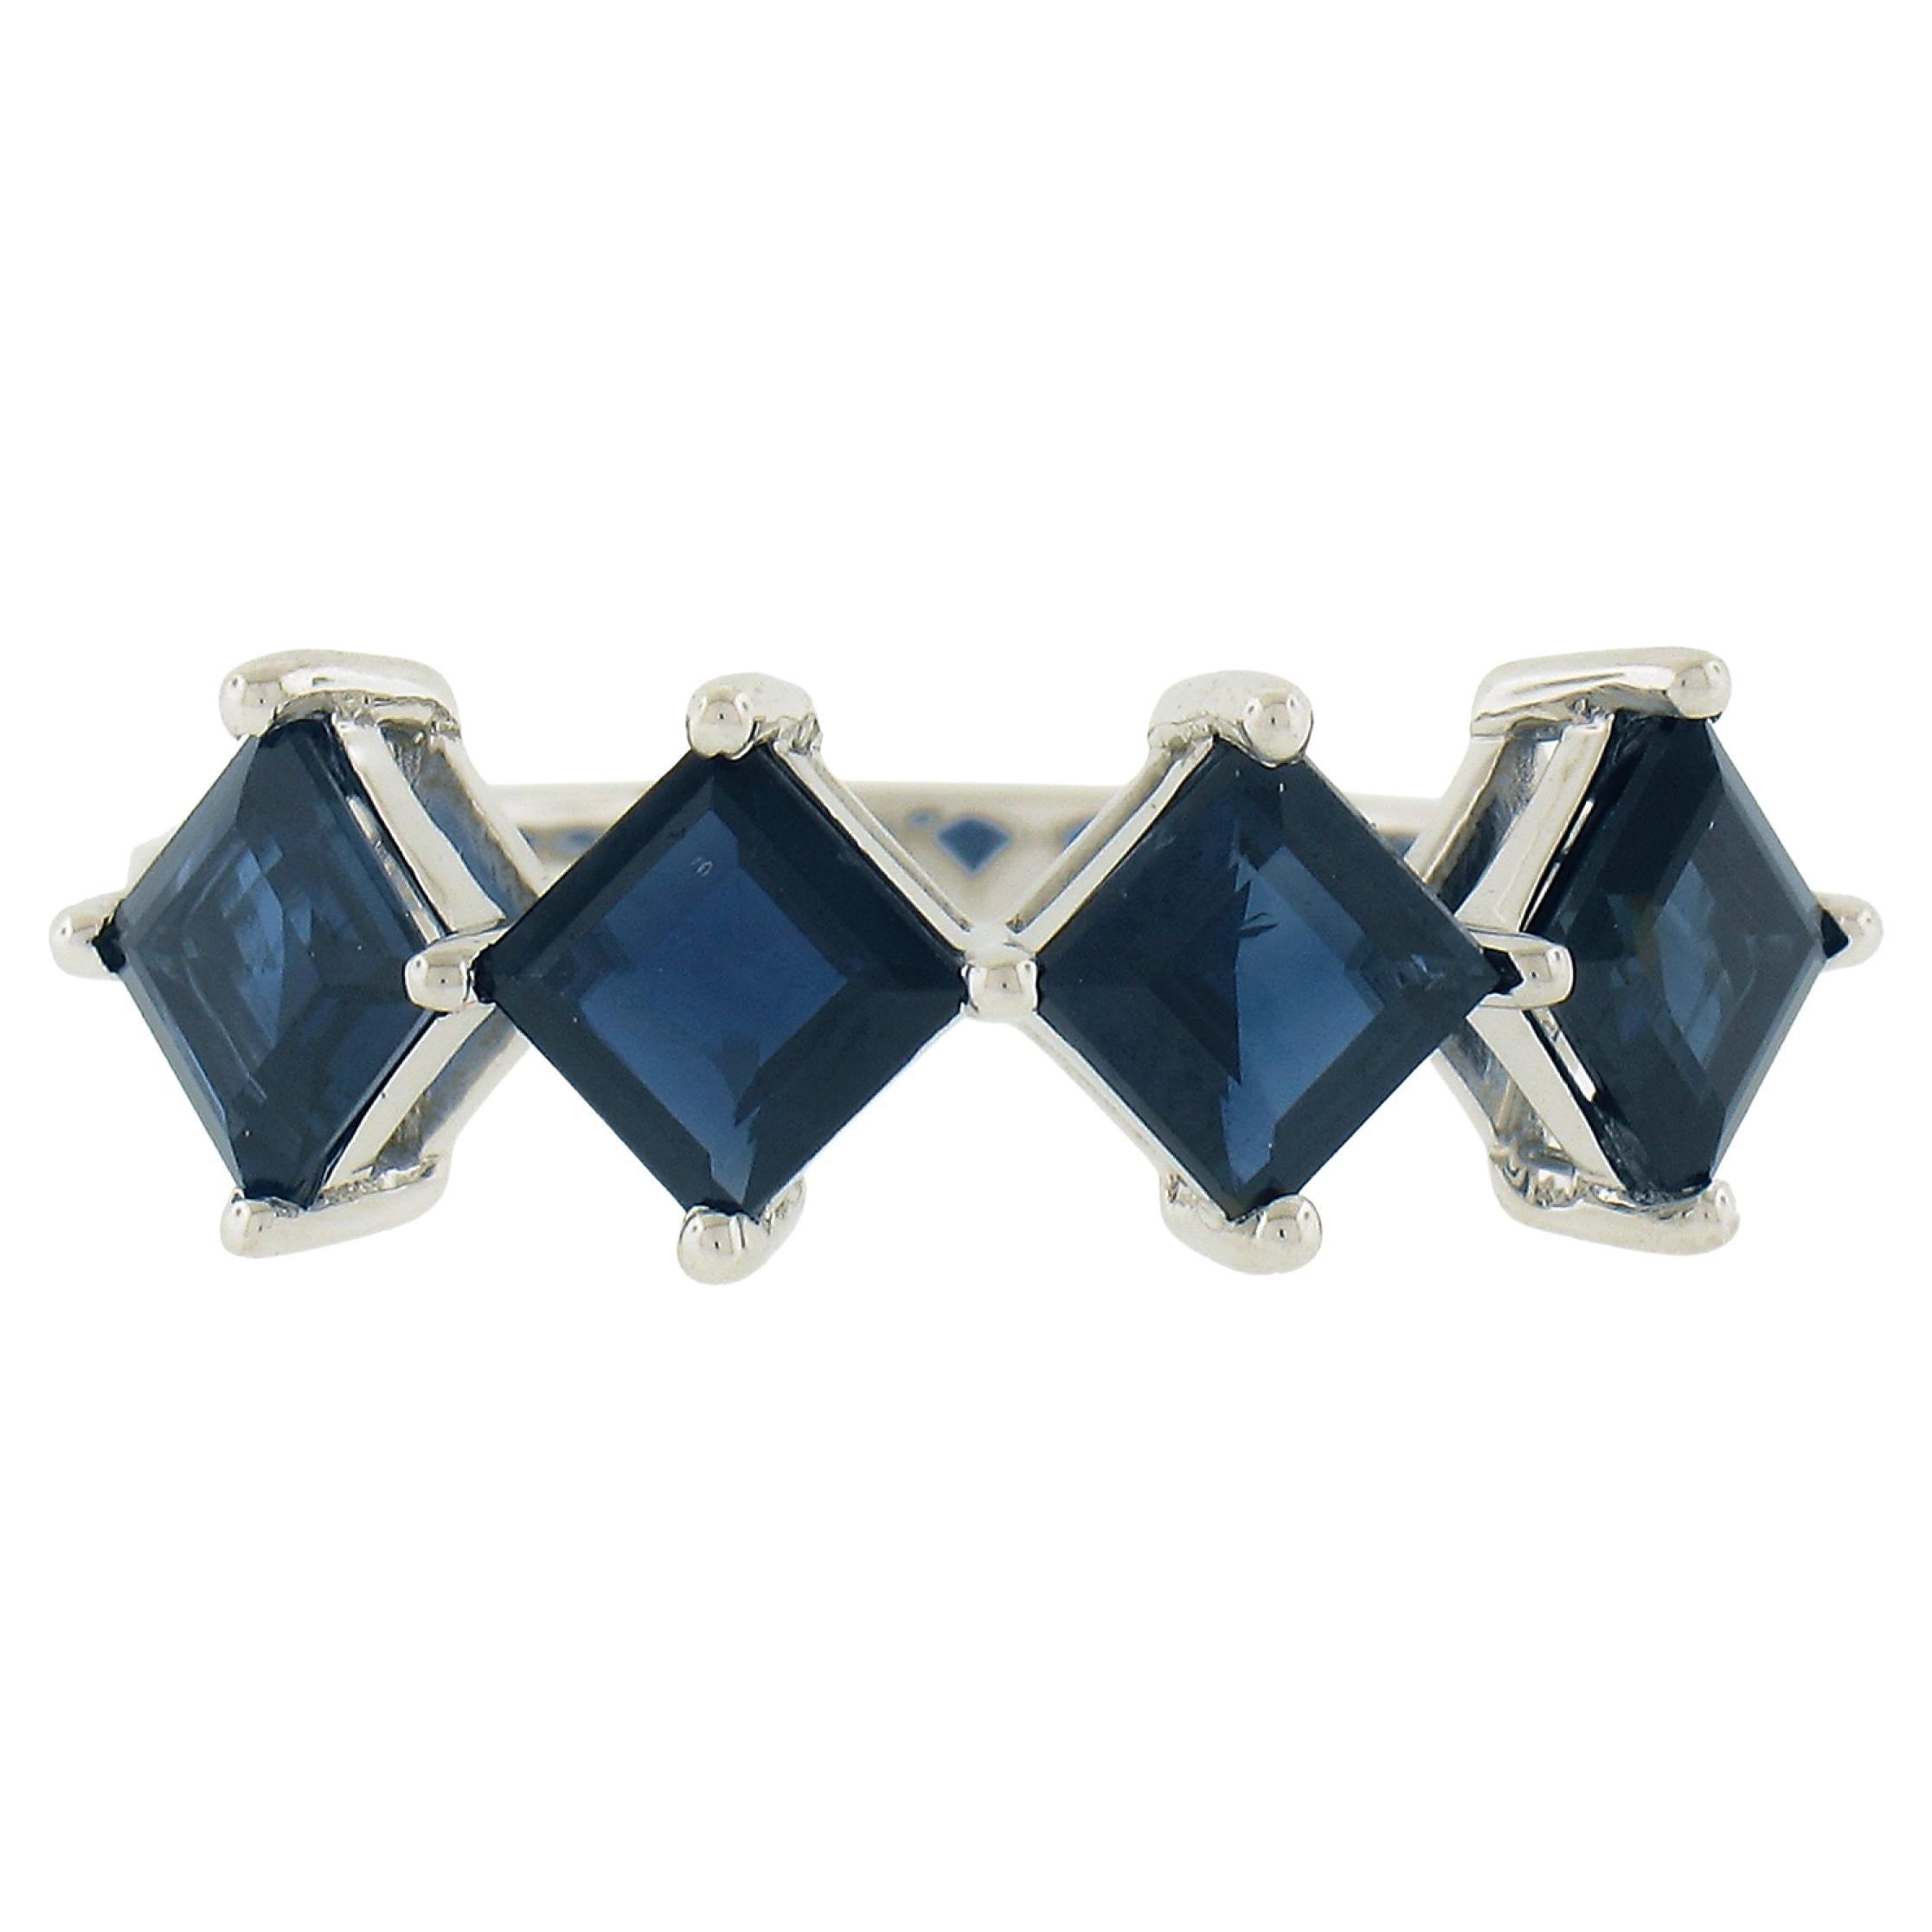 NEW 18K White Gold 2.30ctw Square Step Cut Sapphire Prong Set Stack Band Ring